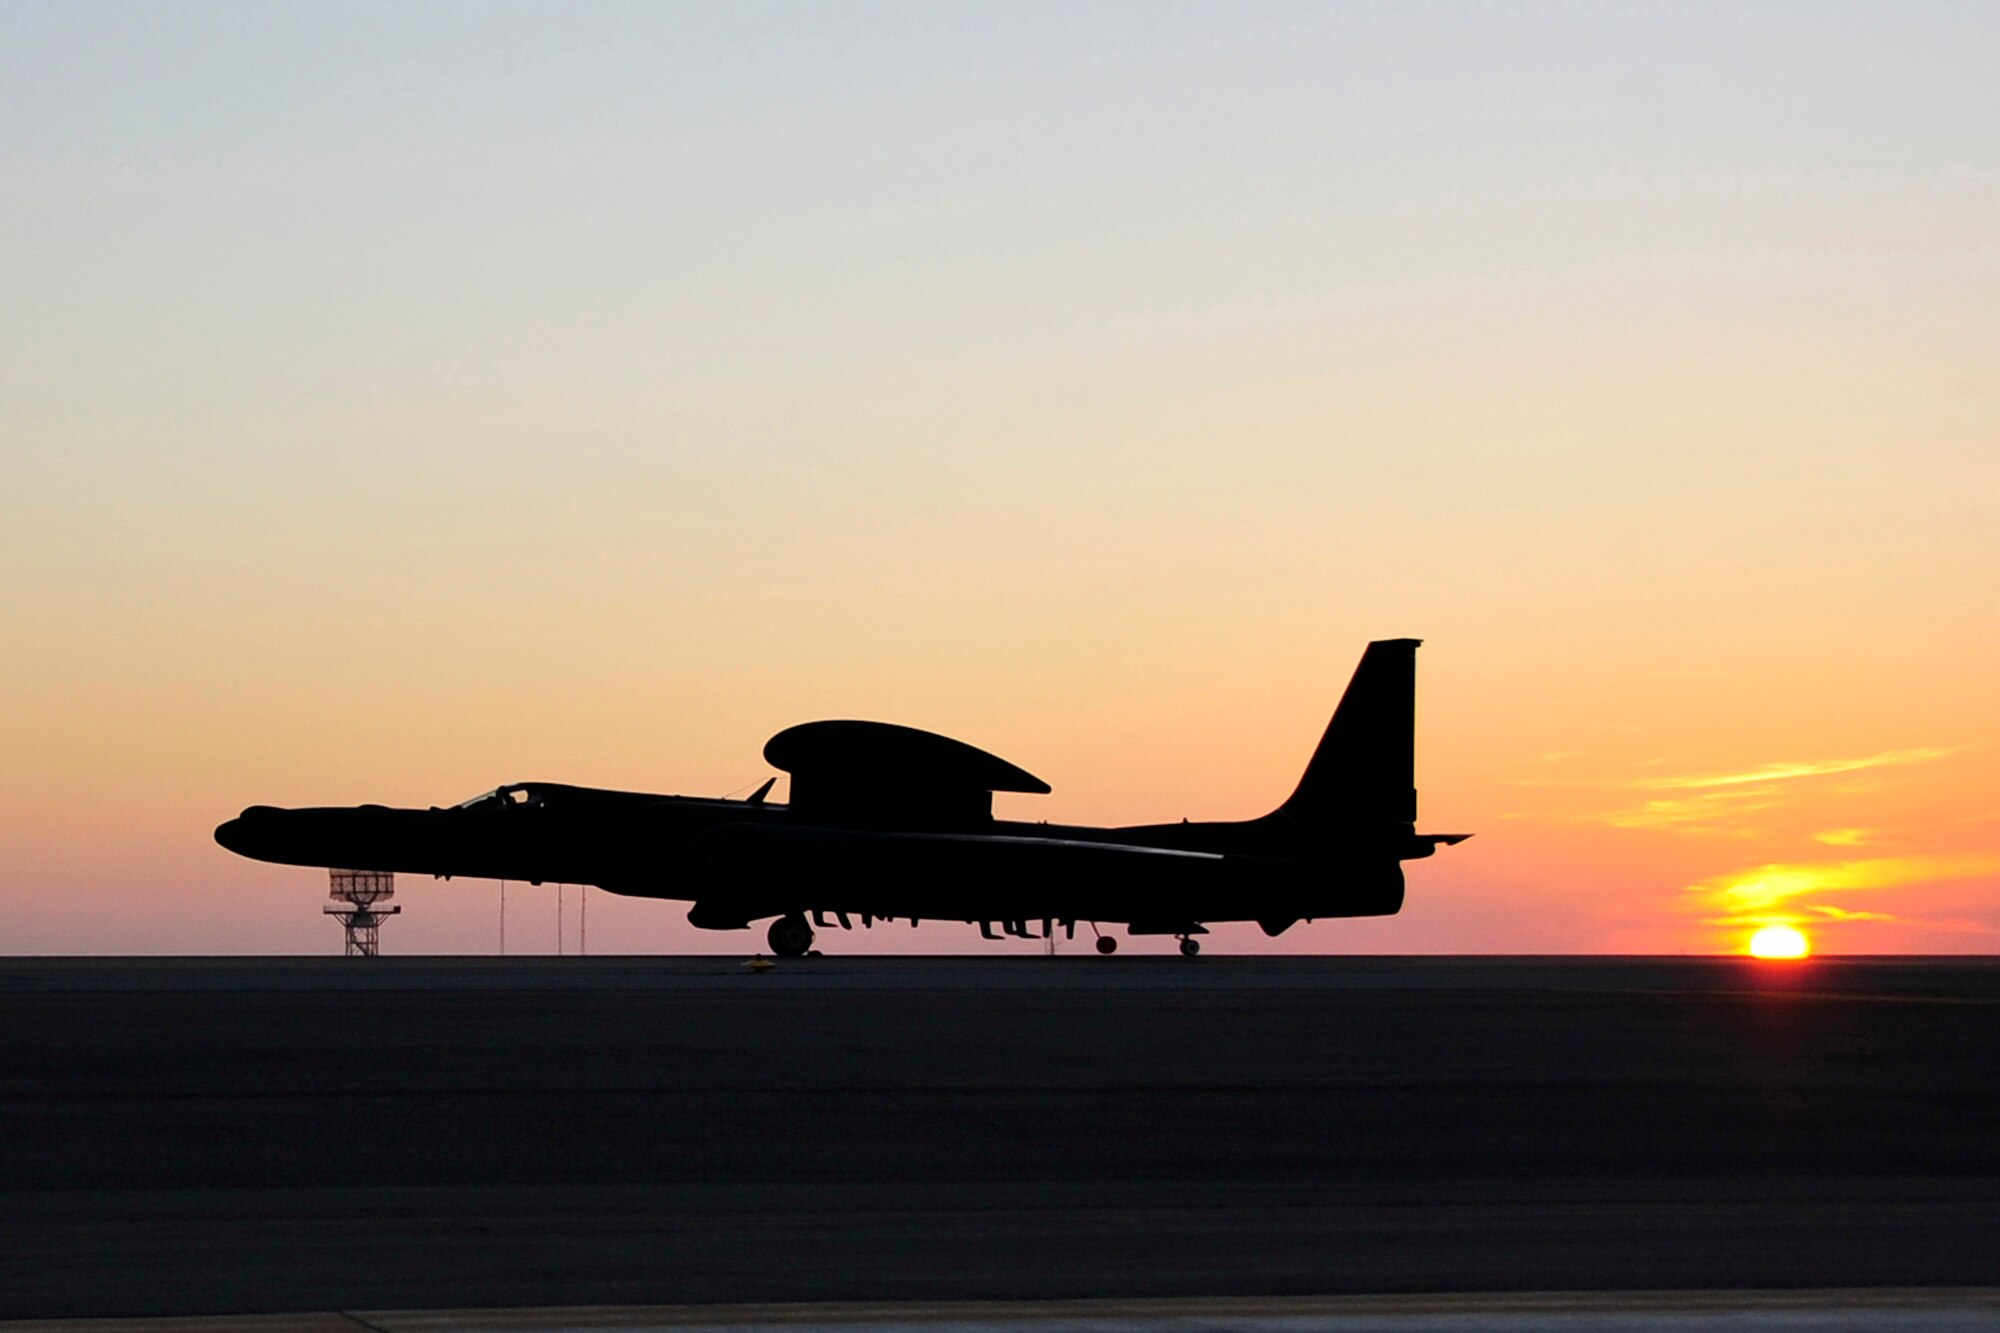 A U-2 Dragonlady aircraft assigned to the 380th Air Expeditionary Wing taxis down the runway at a non-disclosed base in Southwest Asia on Dec. 30, 2009, after completing a mission. The U-2 provides high-altitude, all-weather surveillance and reconnaissance, day or night, in direct support of U.S. and allied forces. It delivers critical imagery and signals intelligence to decision makers throughout all phases of conflict, including peacetime indications and warnings, low-intensity conflict, and large-scale hostilities. The 380th AEW supports Operations Iraqi Freedom and Enduring Freedom and the Combined Joint Task Force-Horn of Africa.  (U.S. Air Force photo/Senior Airman Jenifer H. Calhoun/Released)